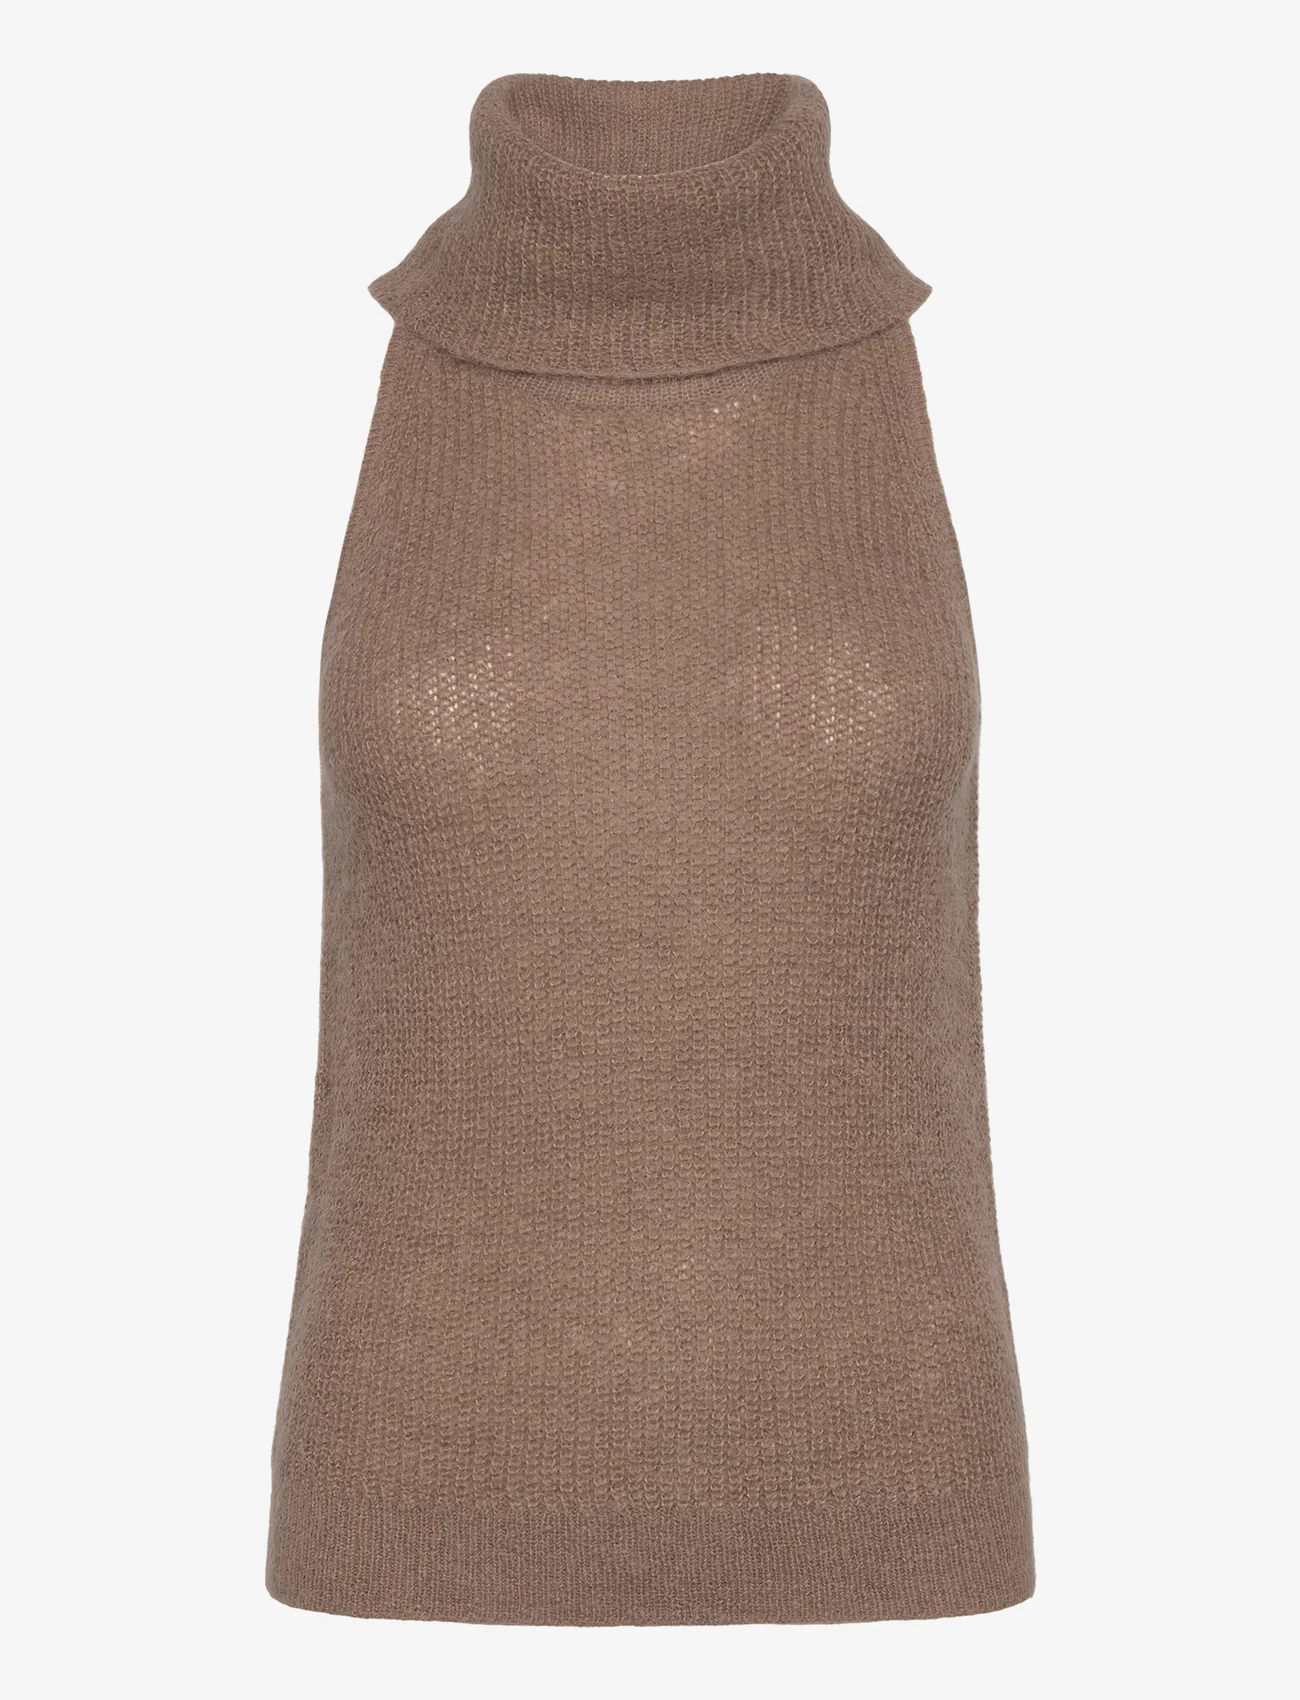 Dante6 - D6Yalena halter knit sweater - sleeveless tops - pure taupe - 0